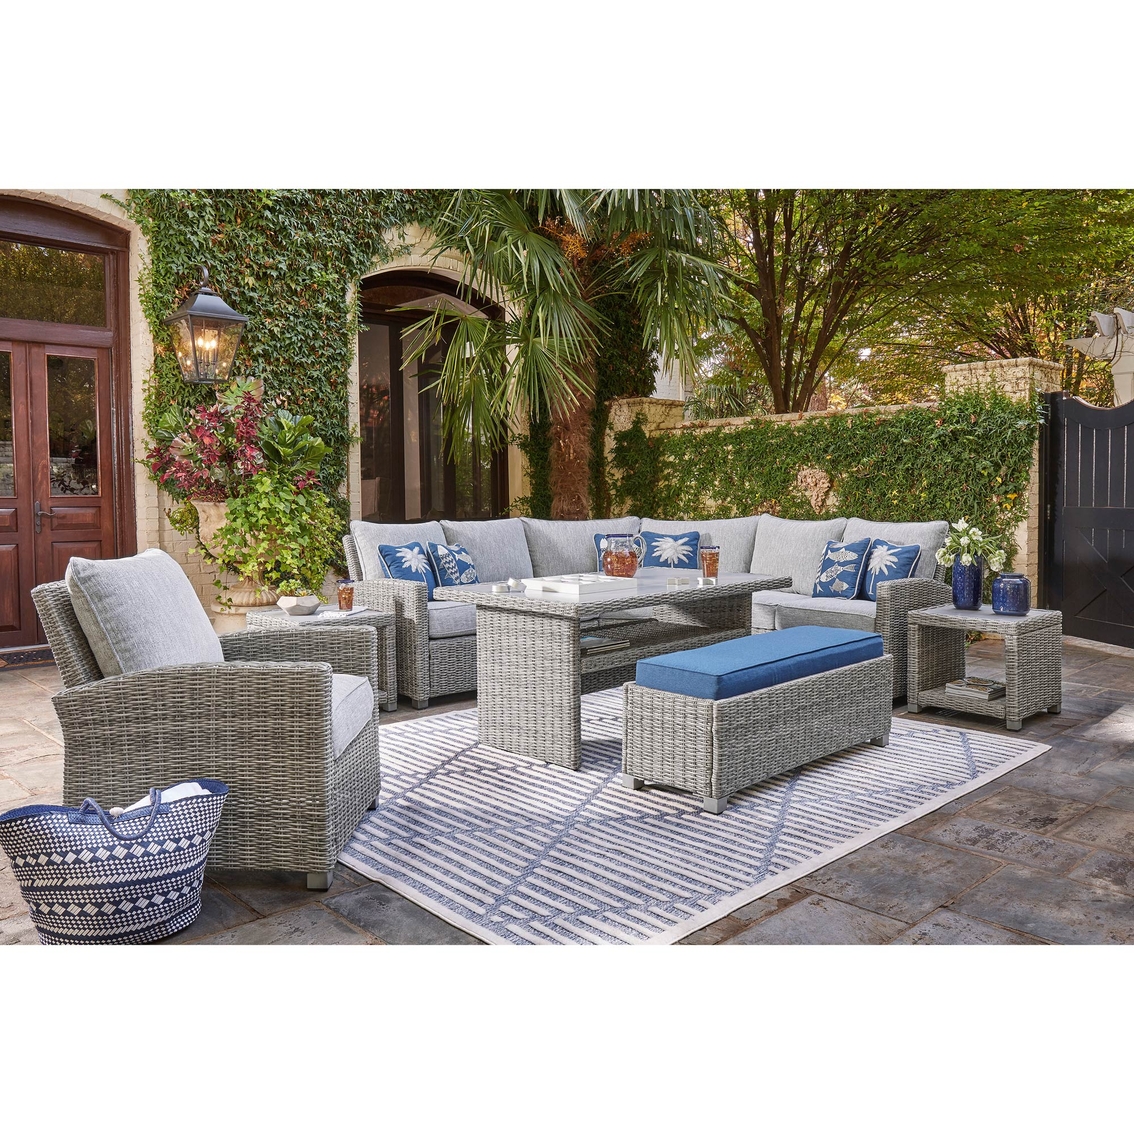 Signature Design by Ashley Naples Beach Outdoor 3 pc. Sectional - Image 10 of 10